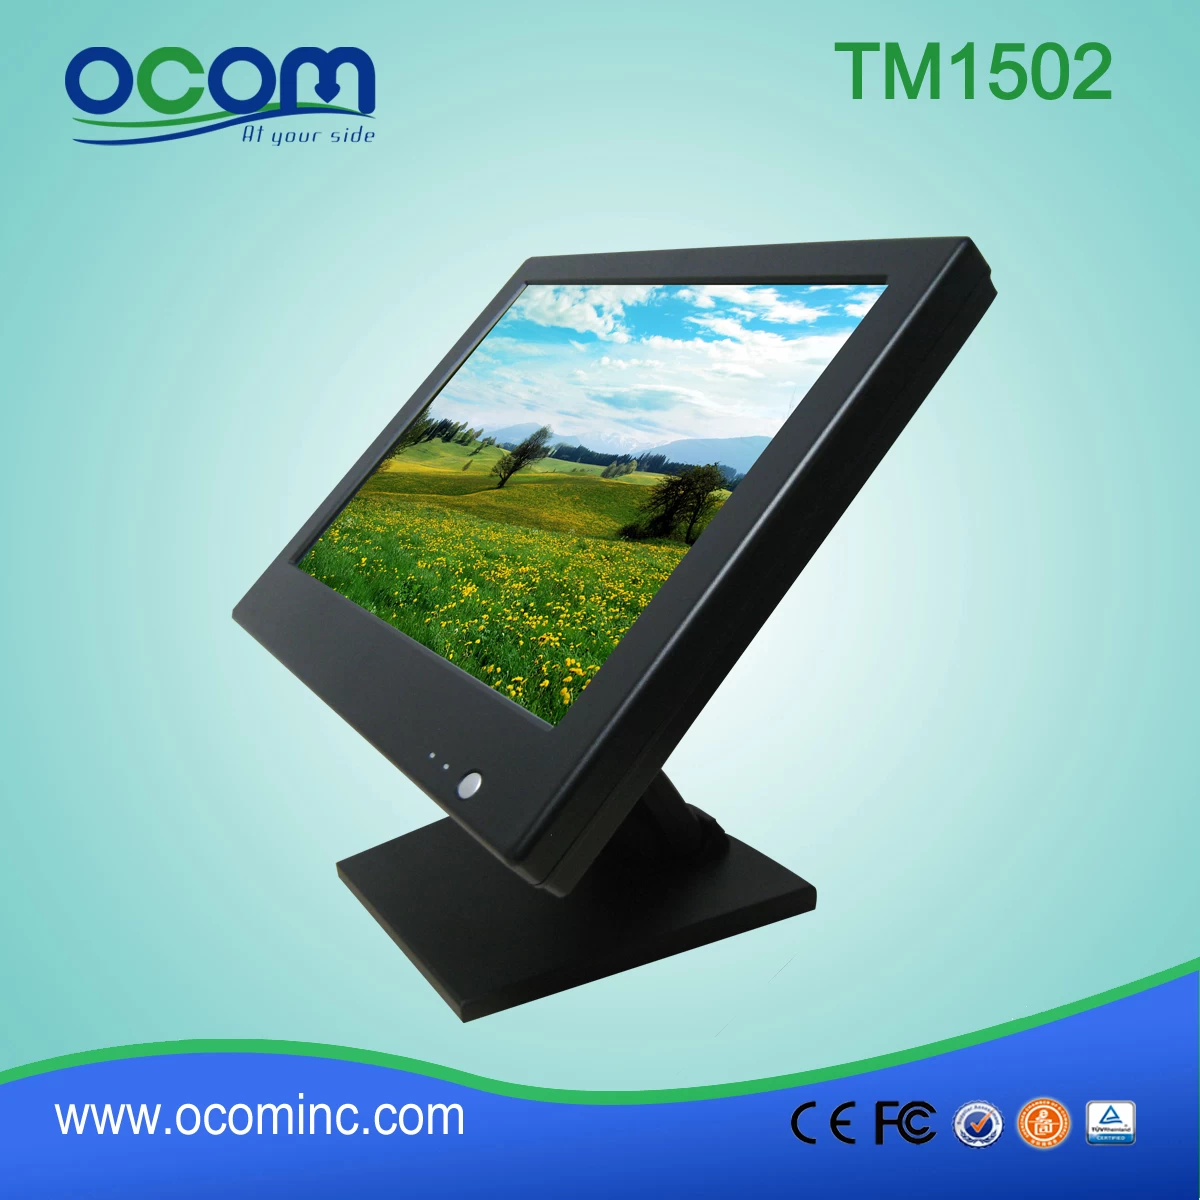 15" 4-wire Resistive Touch Screen POS Monitor